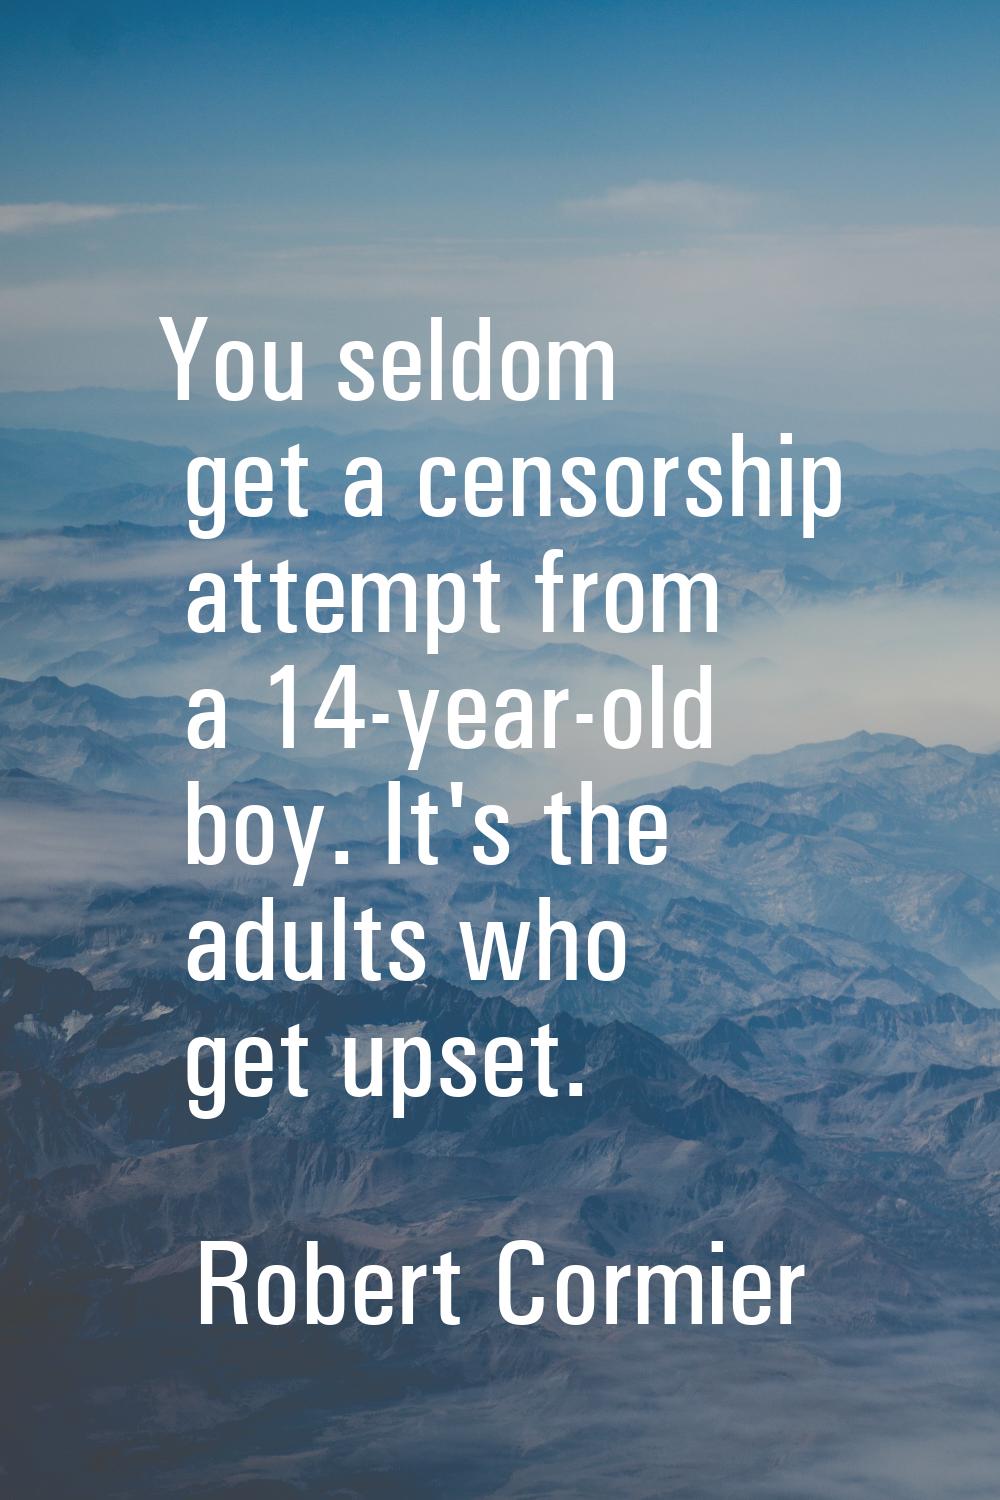 You seldom get a censorship attempt from a 14-year-old boy. It's the adults who get upset.